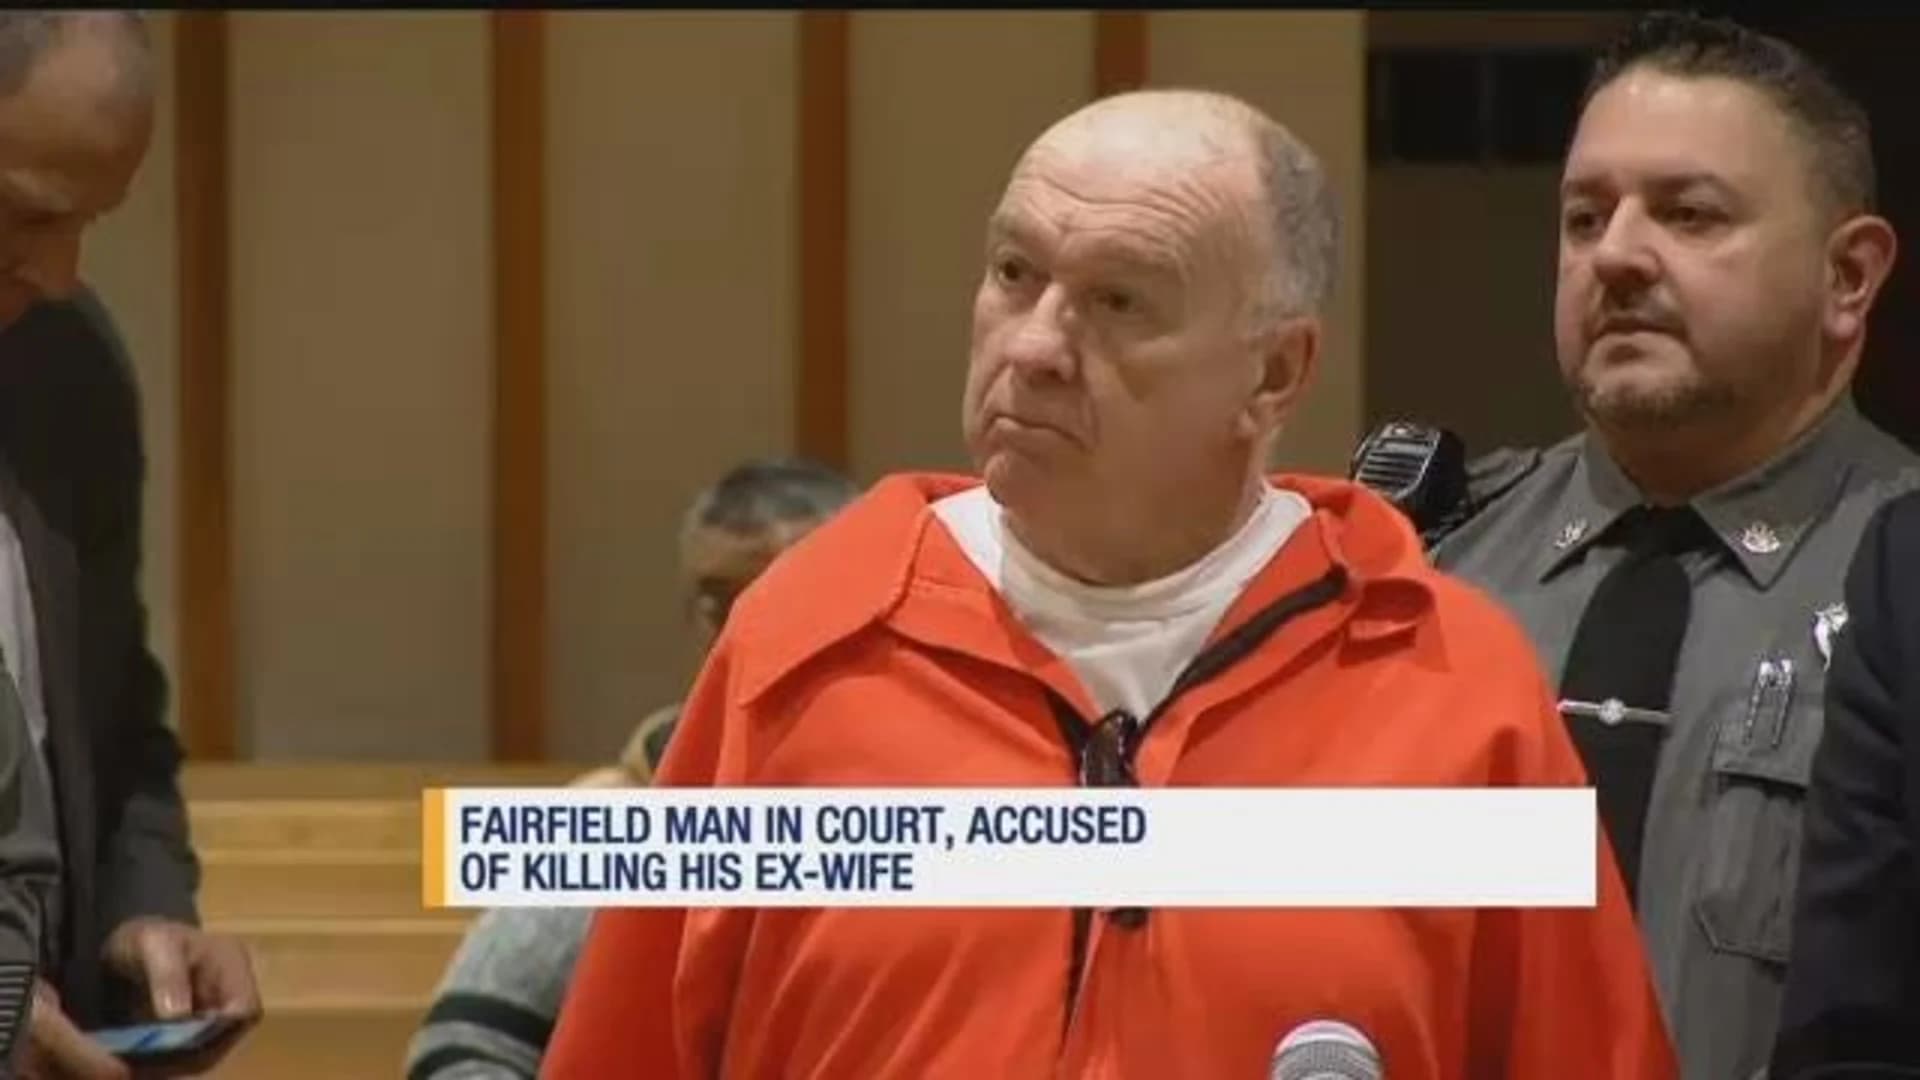 Fairfield man accused in ex-wife's slaying appears in court